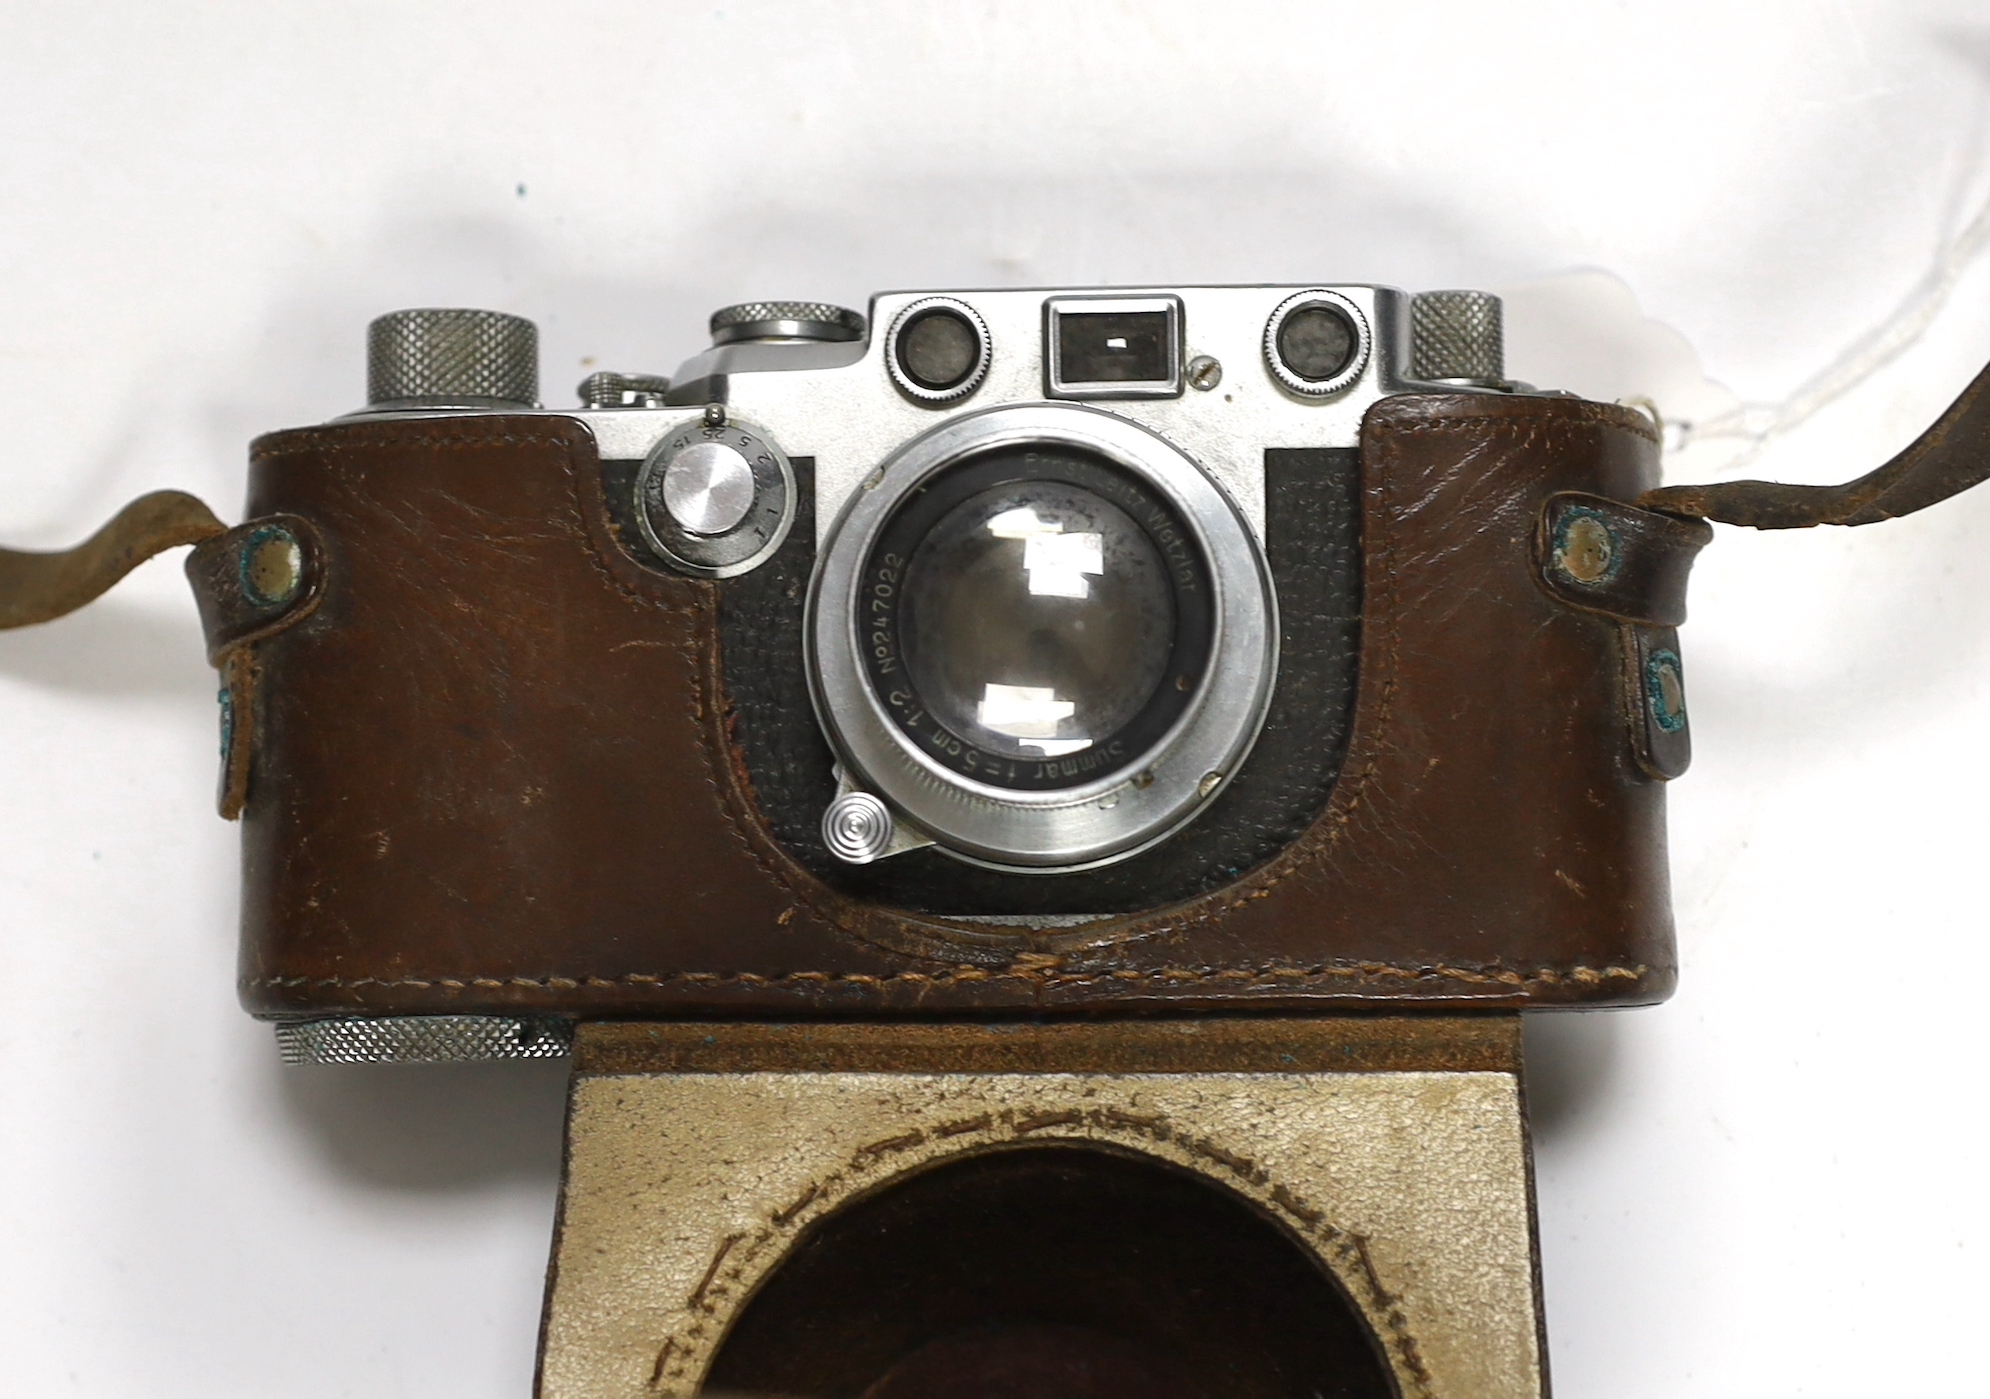 A Leica IIIf camera, Nr.646305, with summar f=5cm 1:2 lens, with leather case with strap